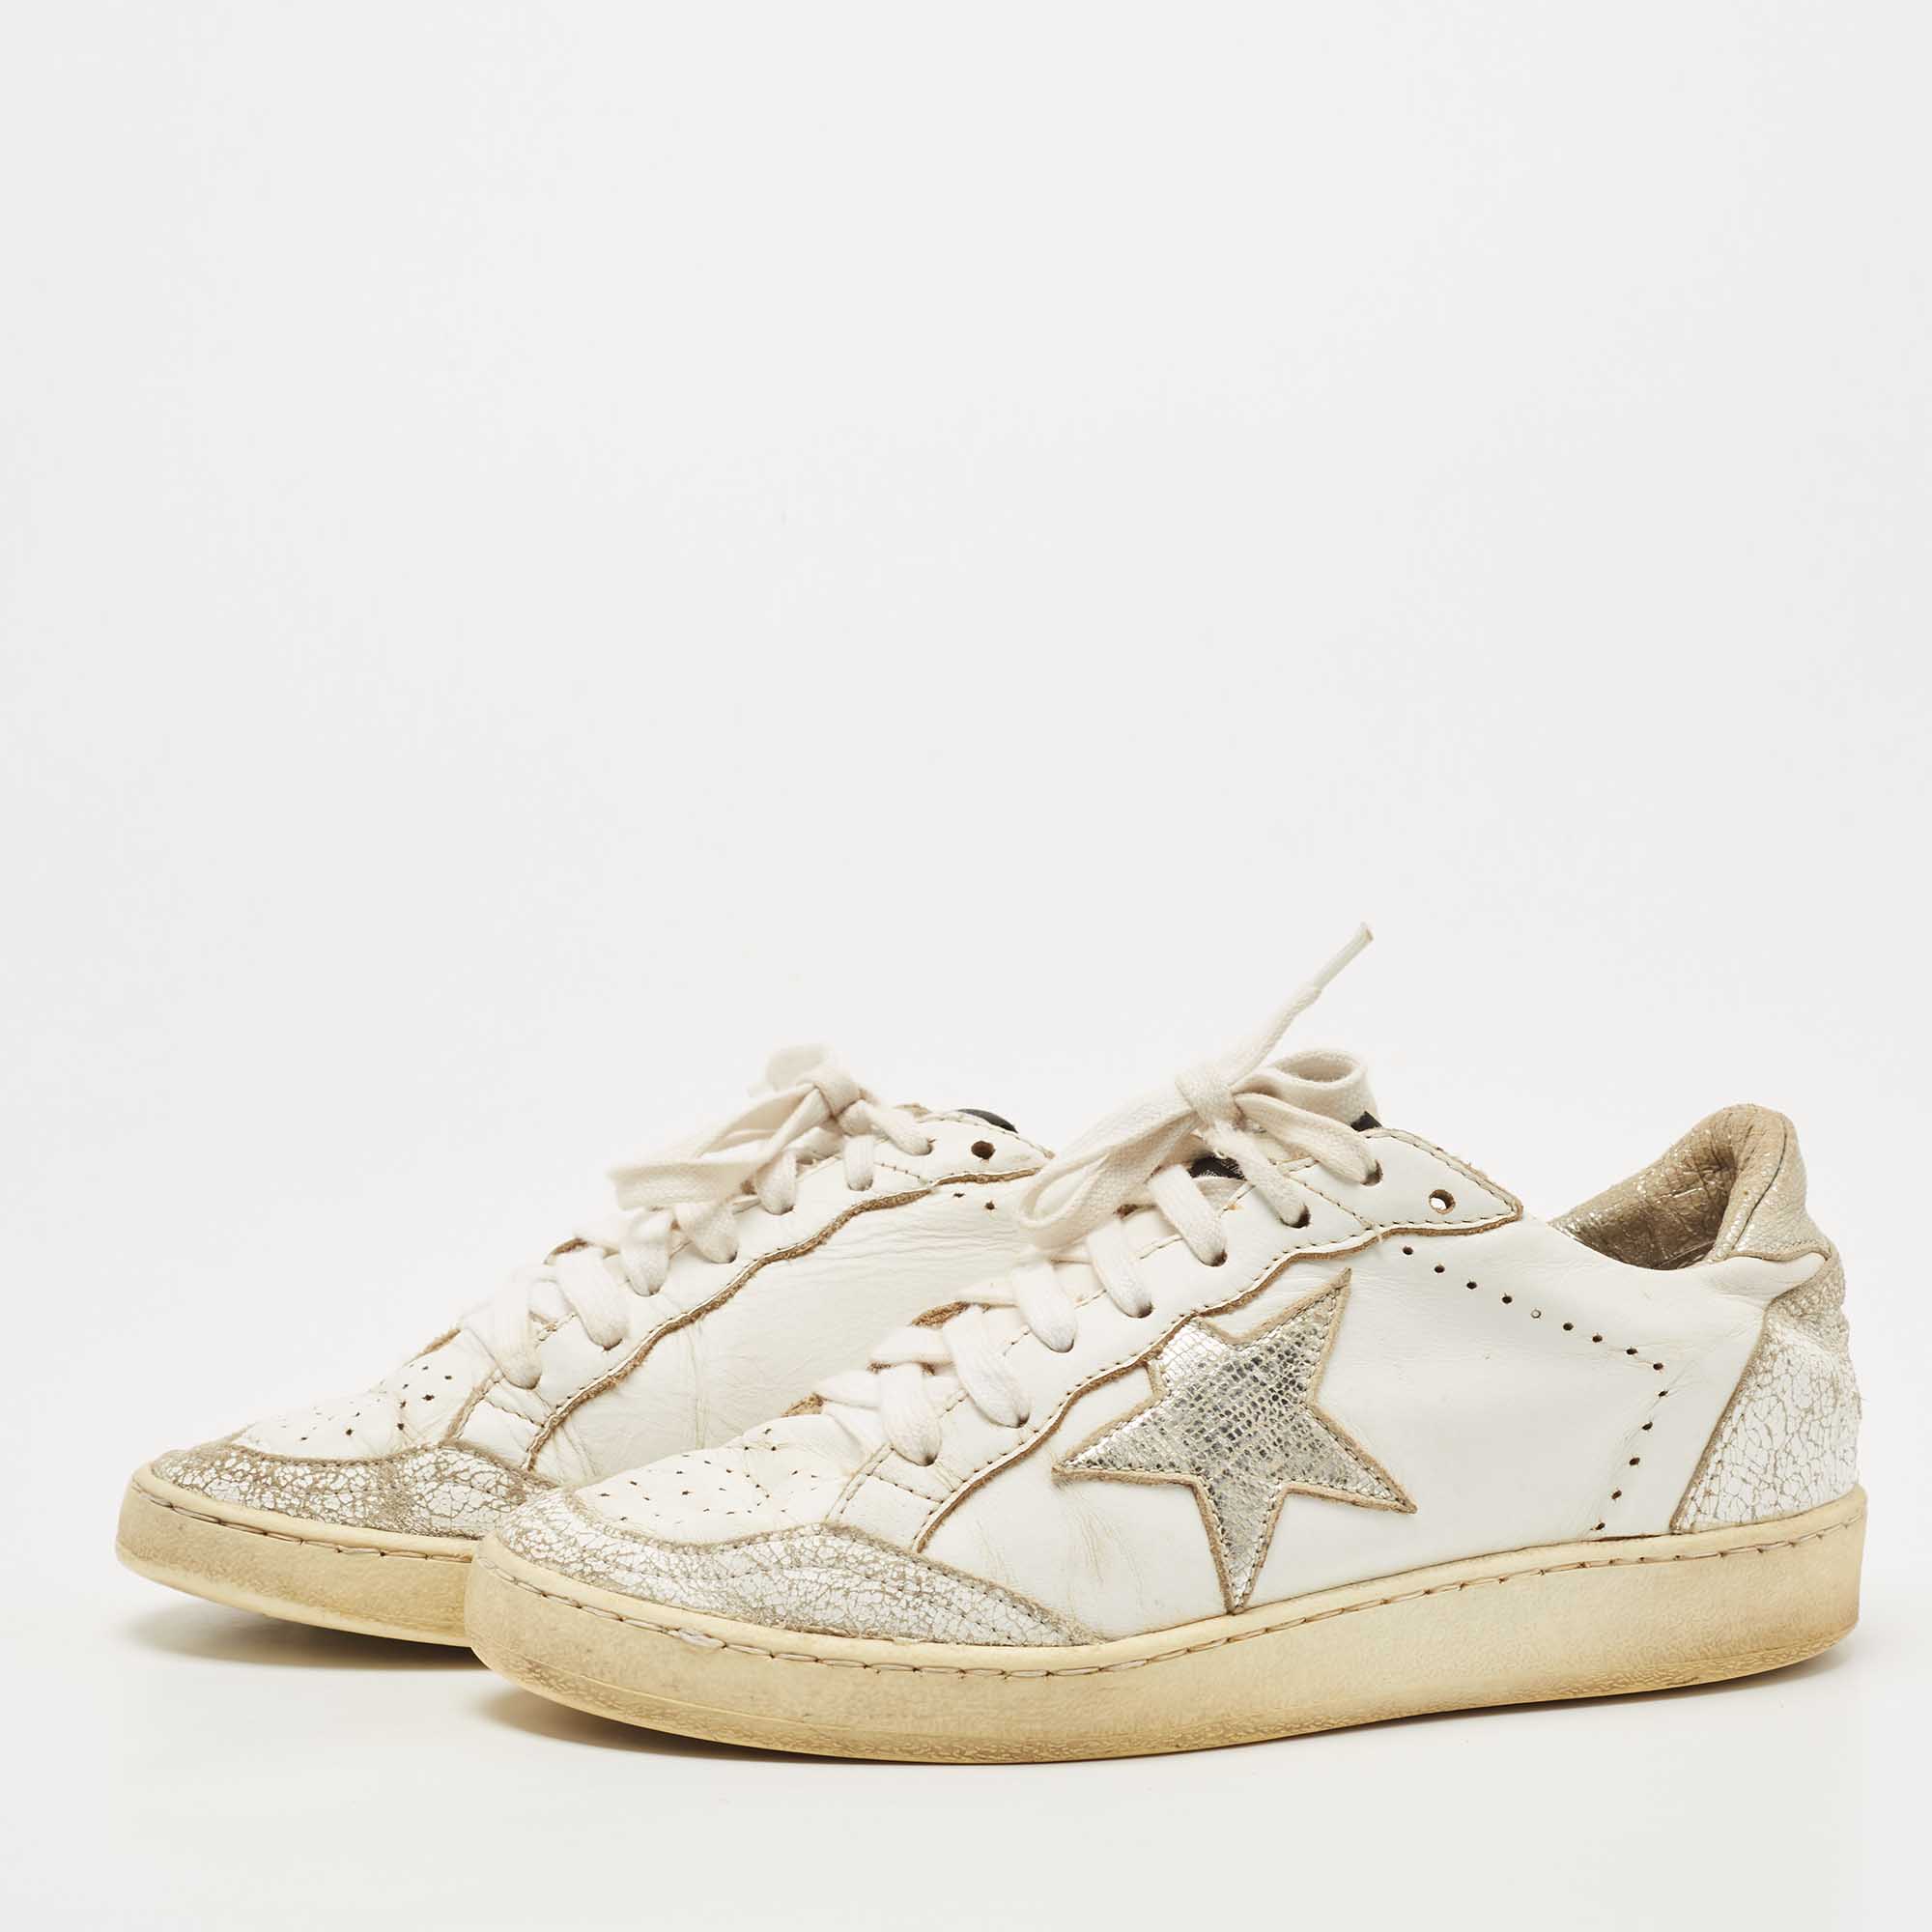 

Golden Goose White/Silver Leather Ball star Low Top Sneakers Size